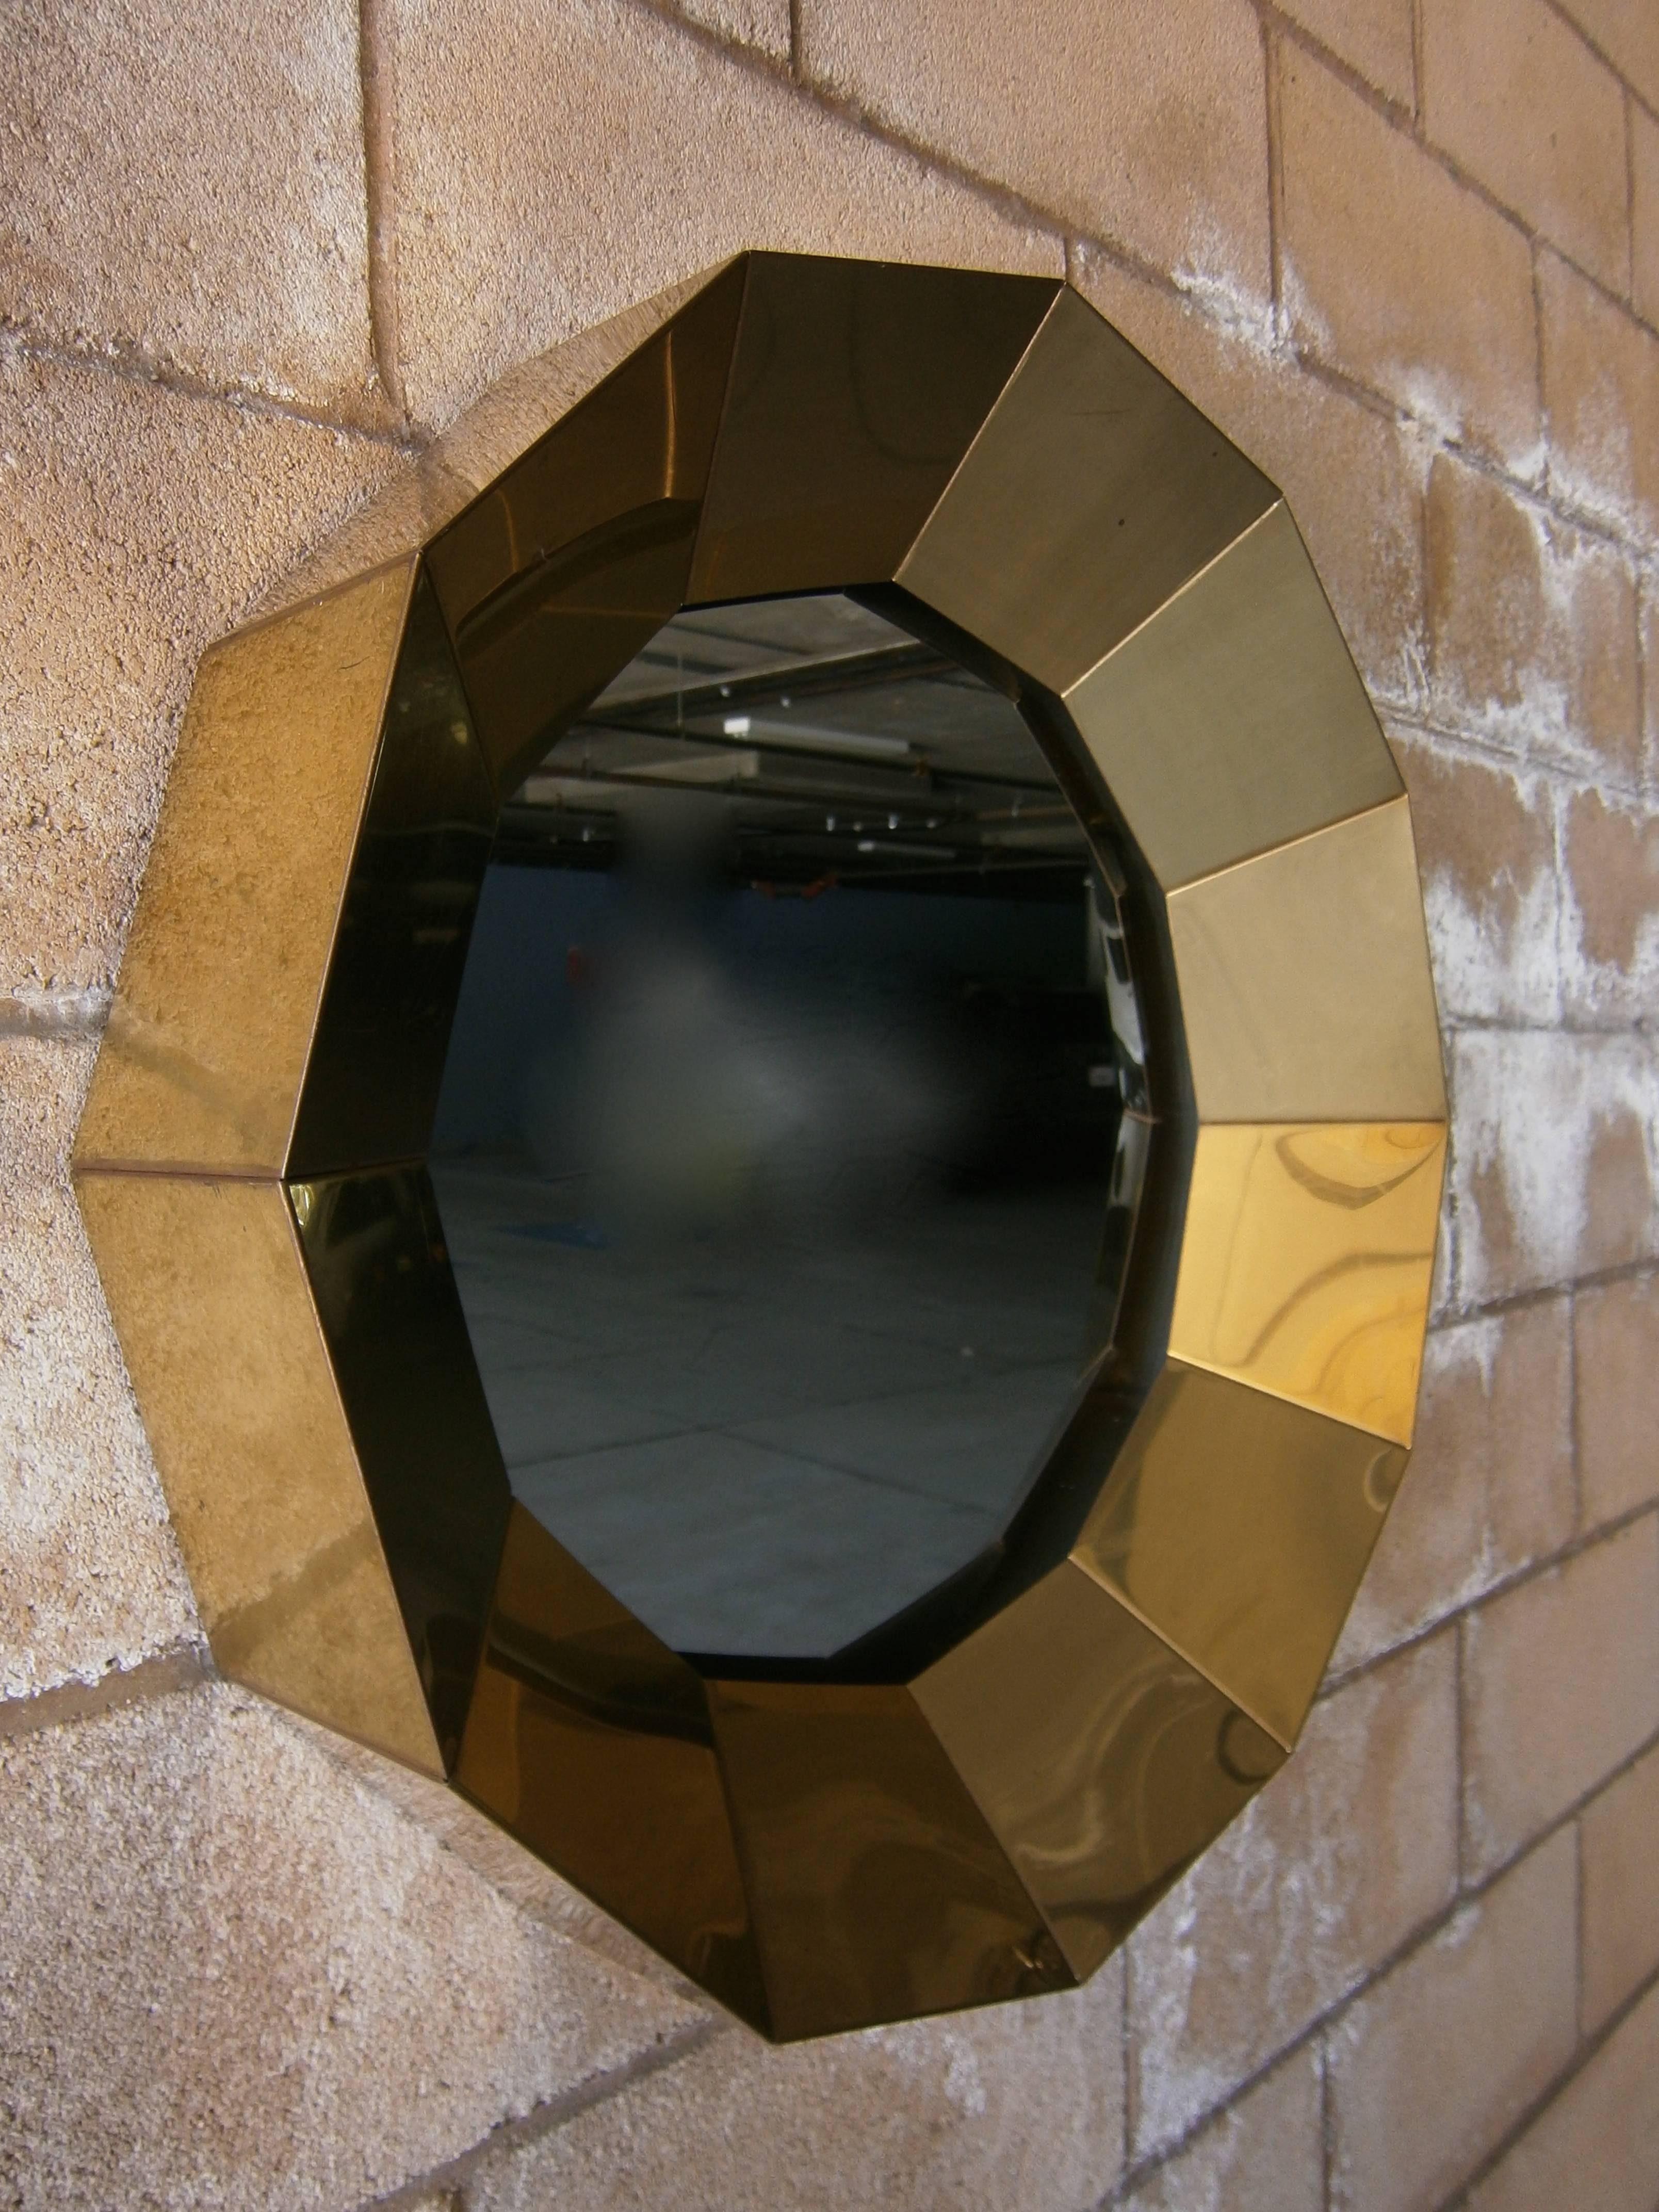 A spectacular 12 sided brass mirror by Curtis Jere, circa 1970's.  Some scuff marks in areas.